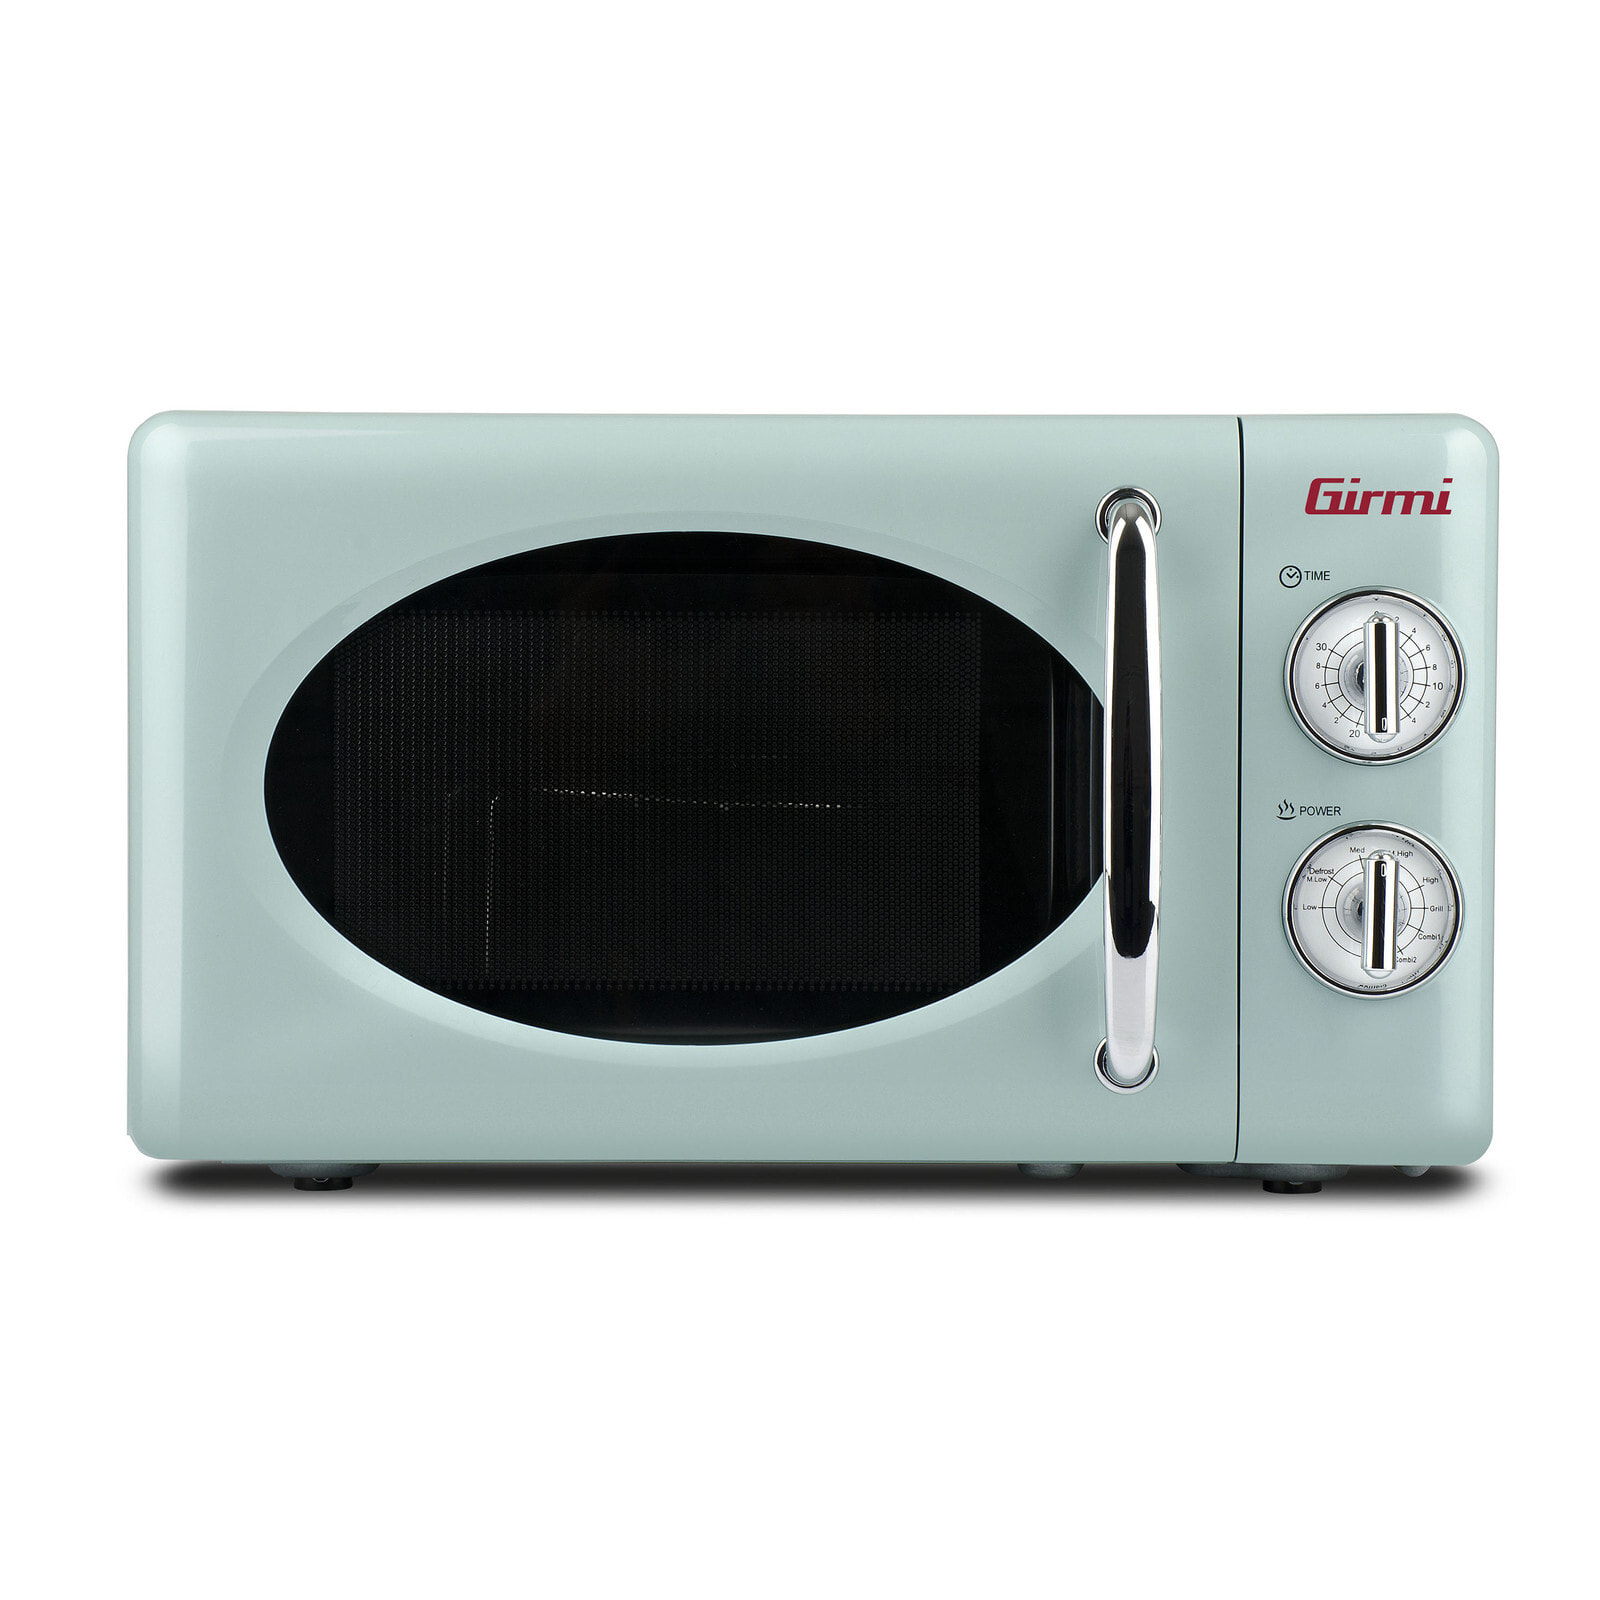 FM21 - Over the range - Combination microwave - 20 L - 700 W - Rotary - Blue